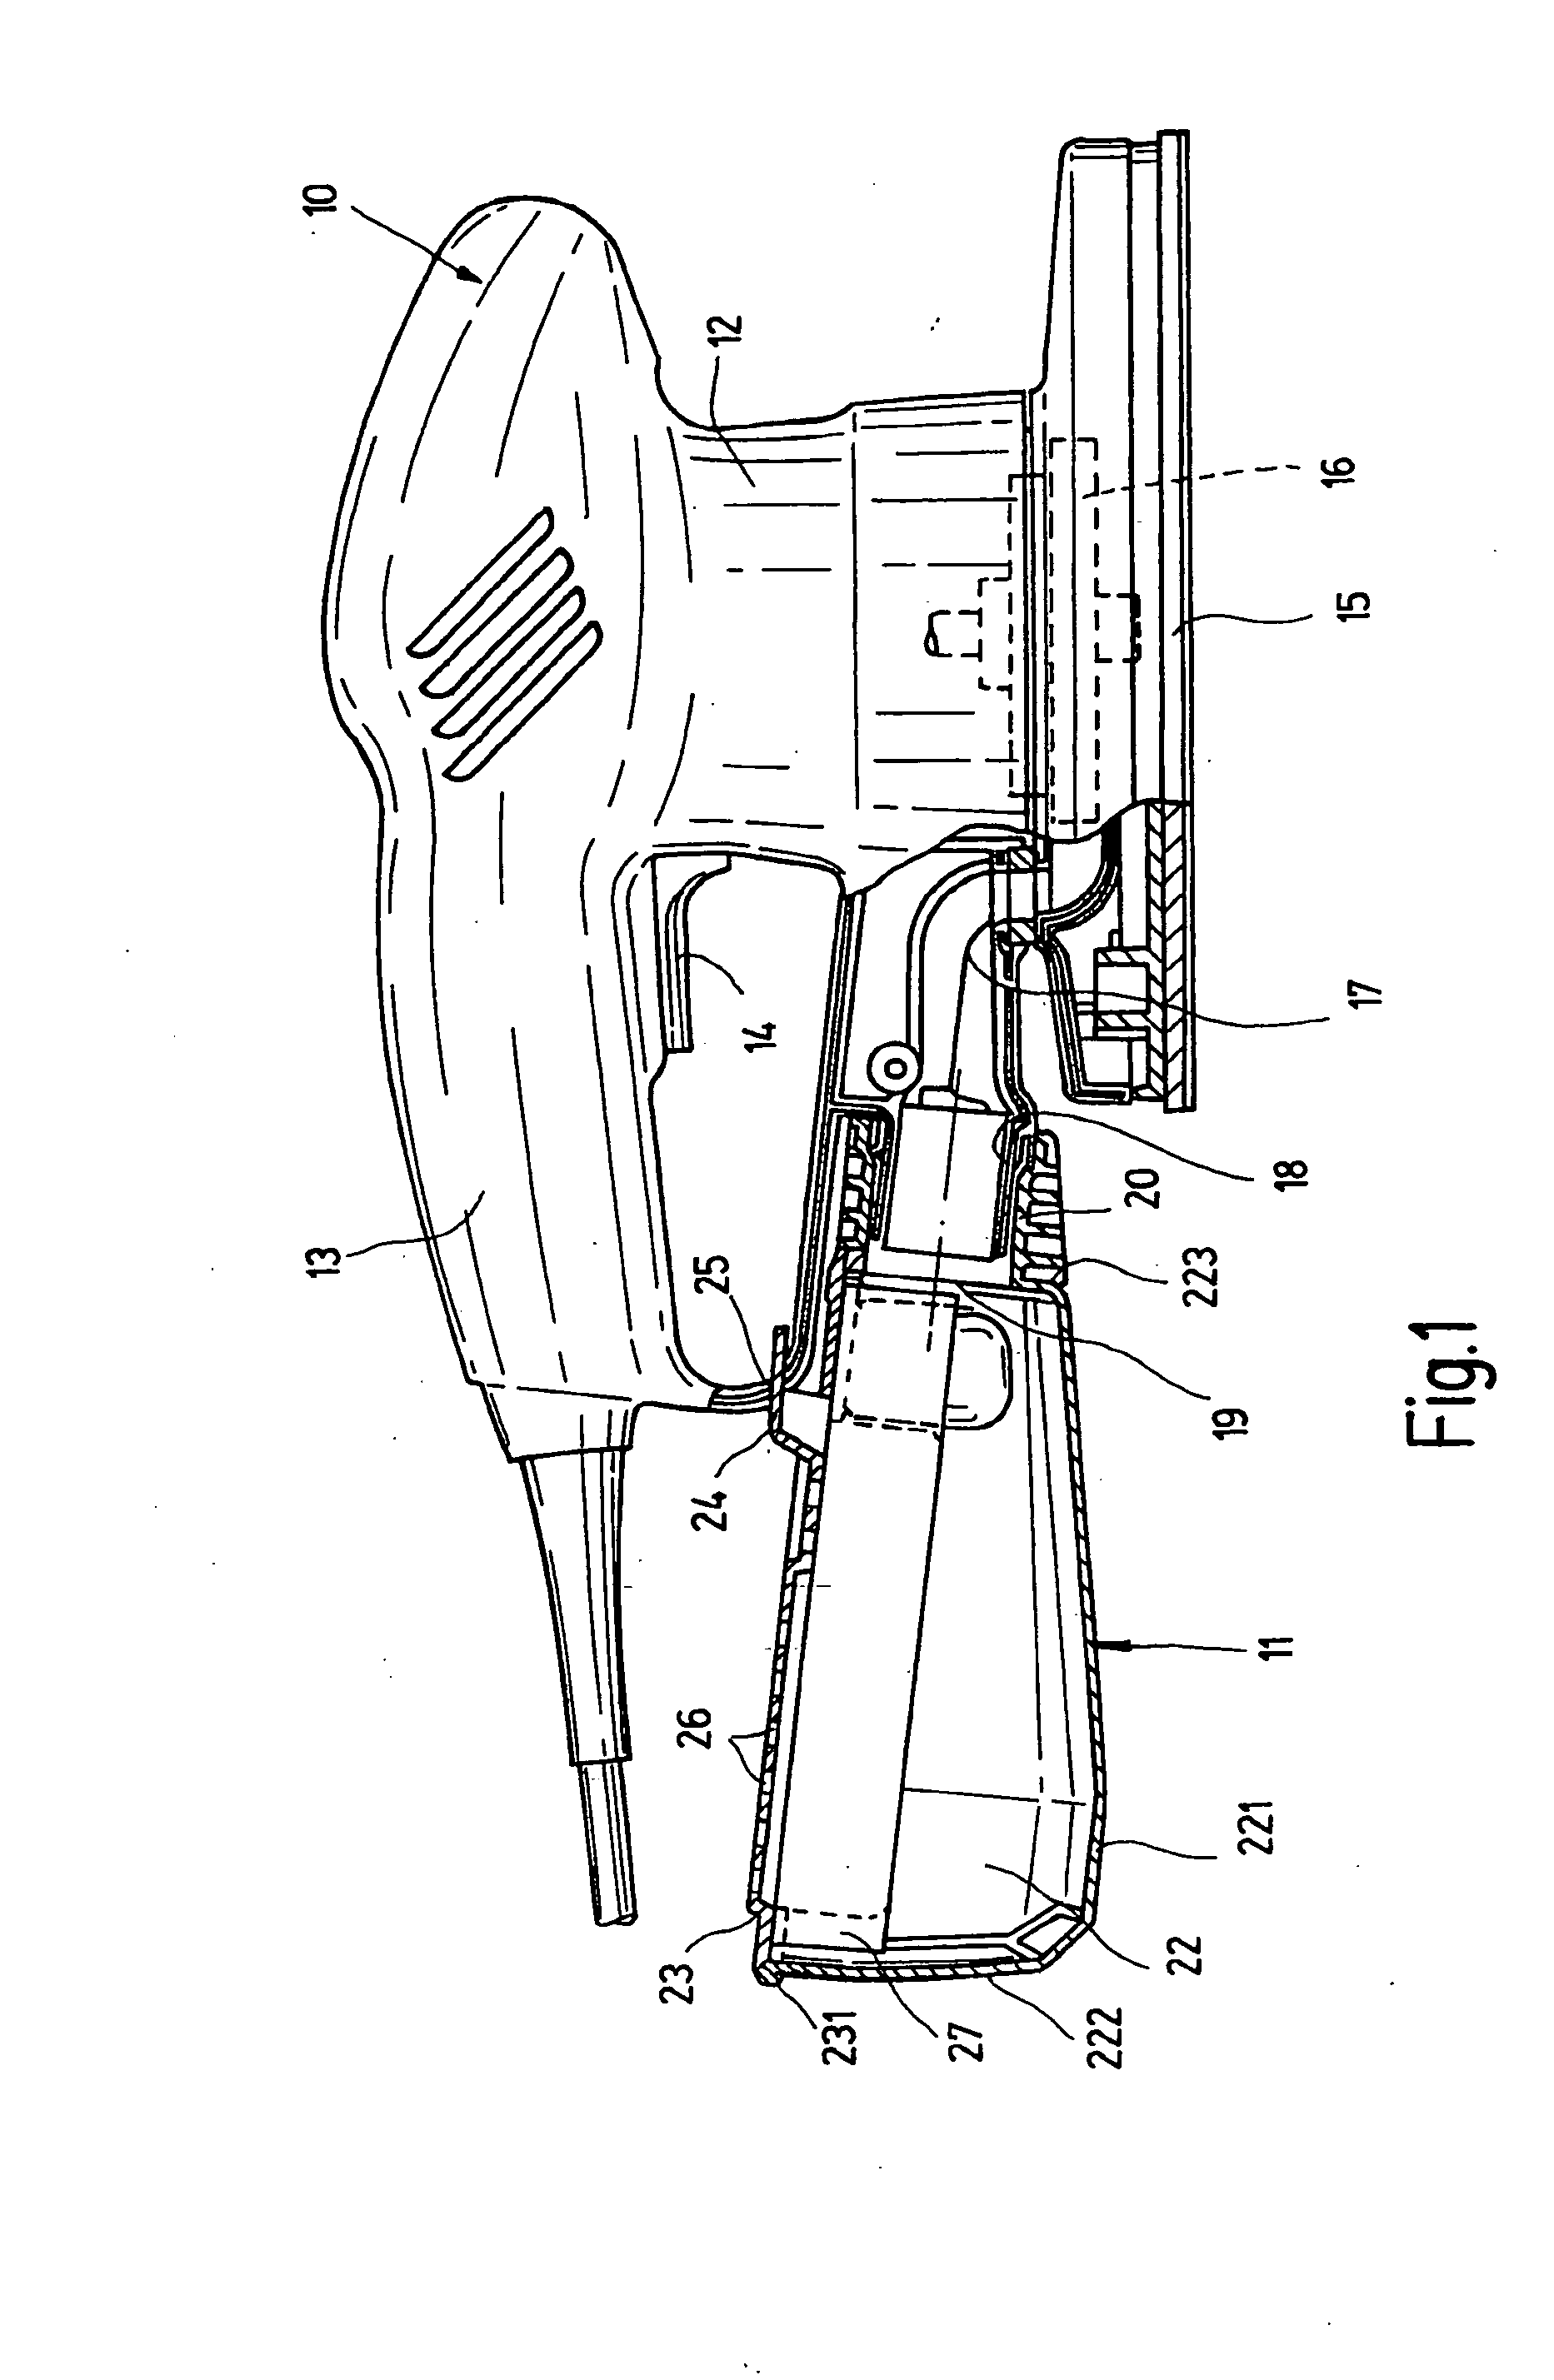 Dust collecting container for a hand-held machine tool